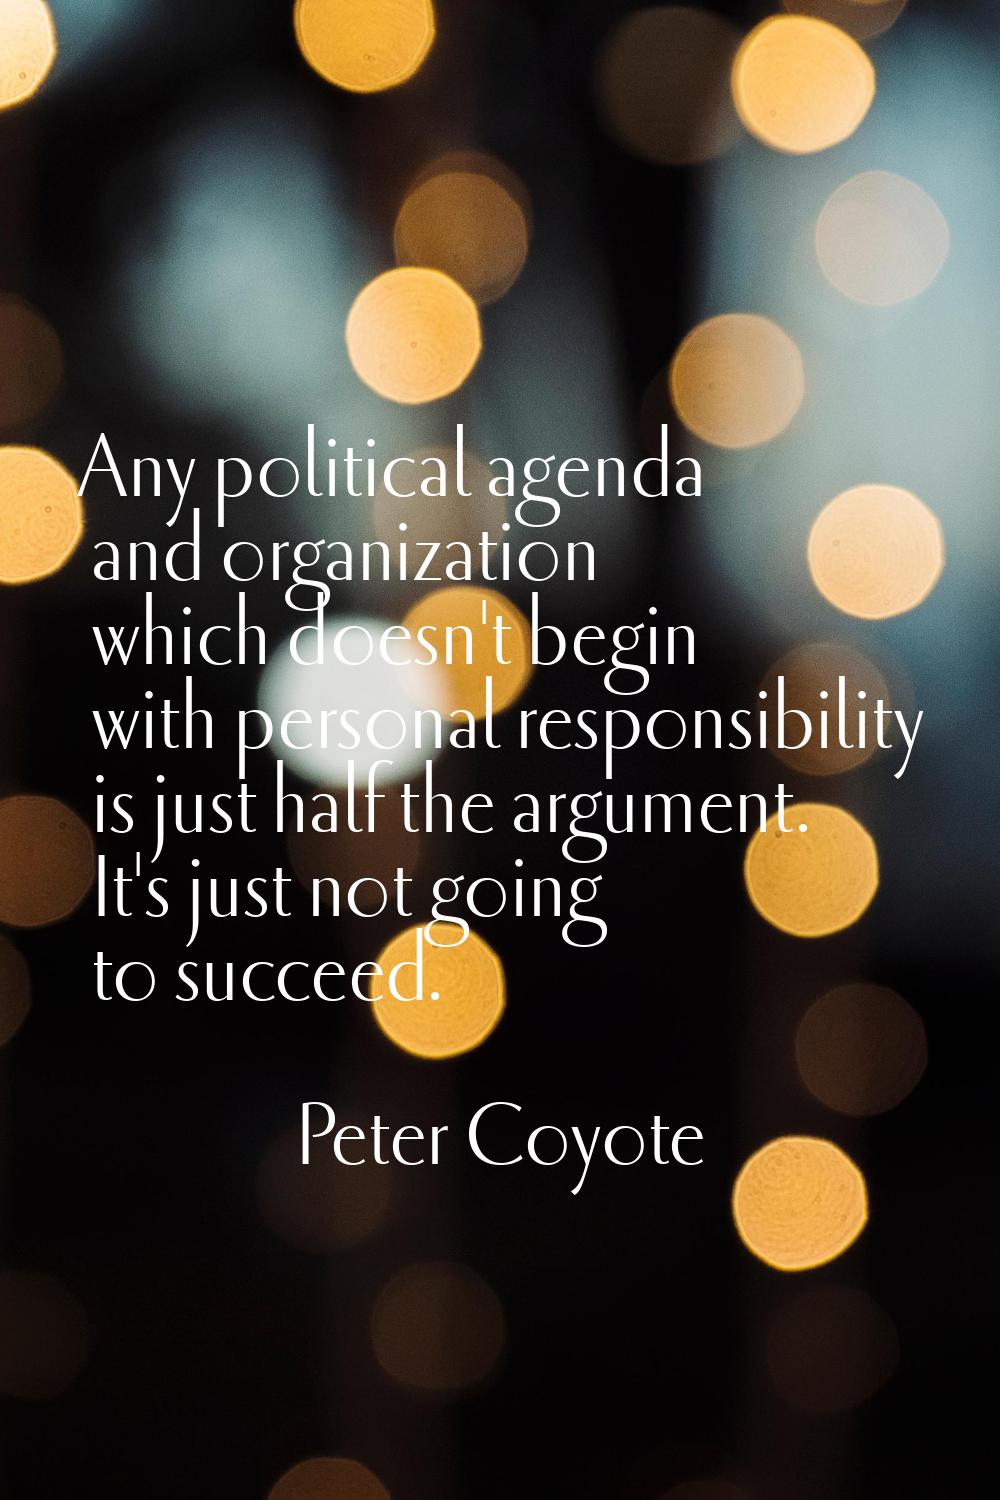 Any political agenda and organization which doesn't begin with personal responsibility is just half